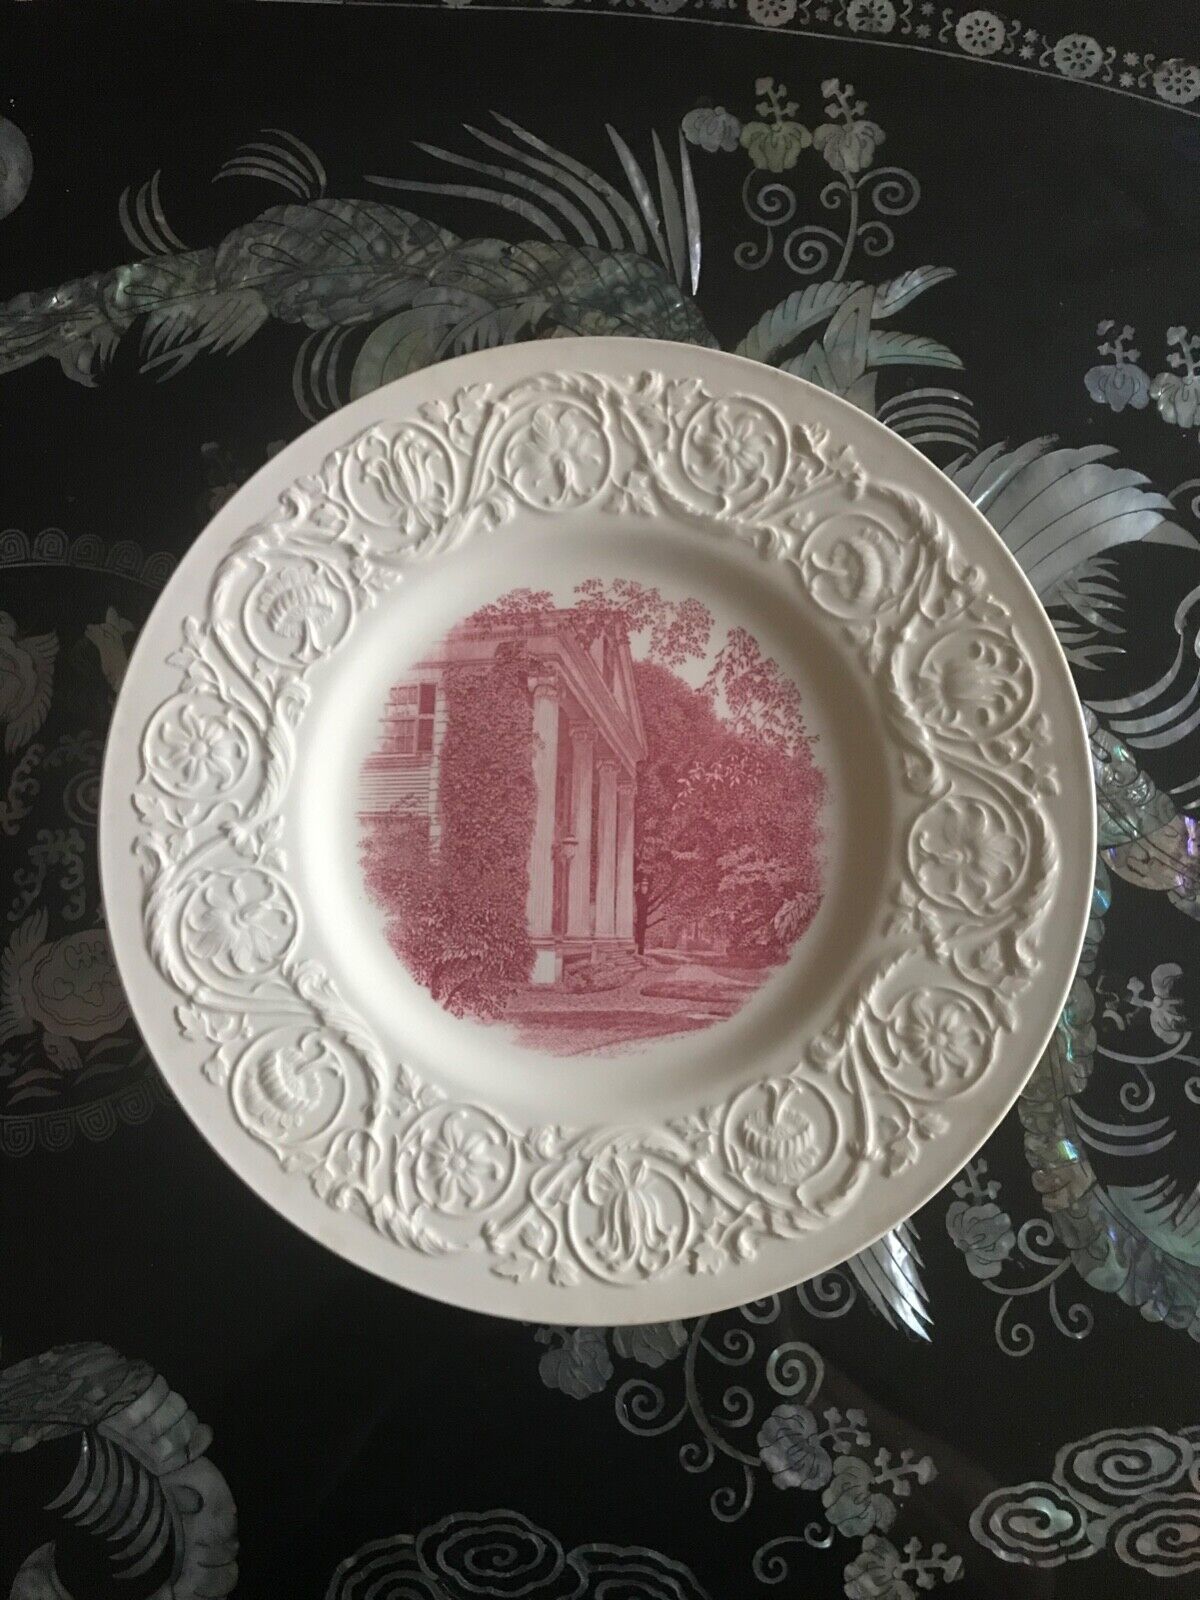 Smith College Commemorative Wedgwood 12 Total Plate Collection - A+ Condition